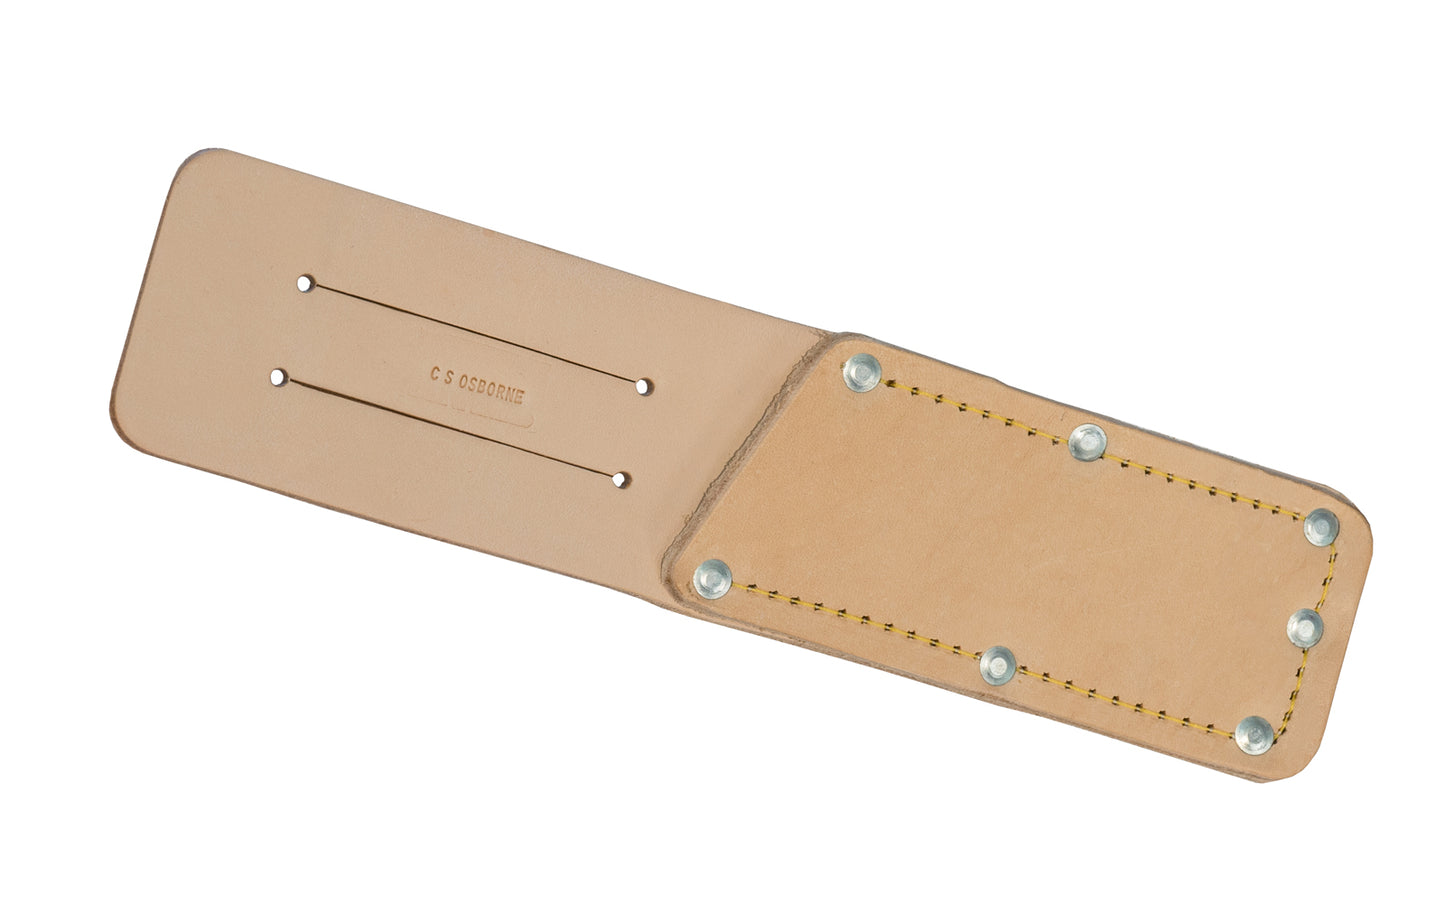 CS Osborne Leather Sheath - 10" Length ~ No. 72 - CS Osborne Safety Sheath - Knife Tool Sheath  - Made in USA - Stitched edges reinforced with rivets - Leather material - #72 ~ 096685601847